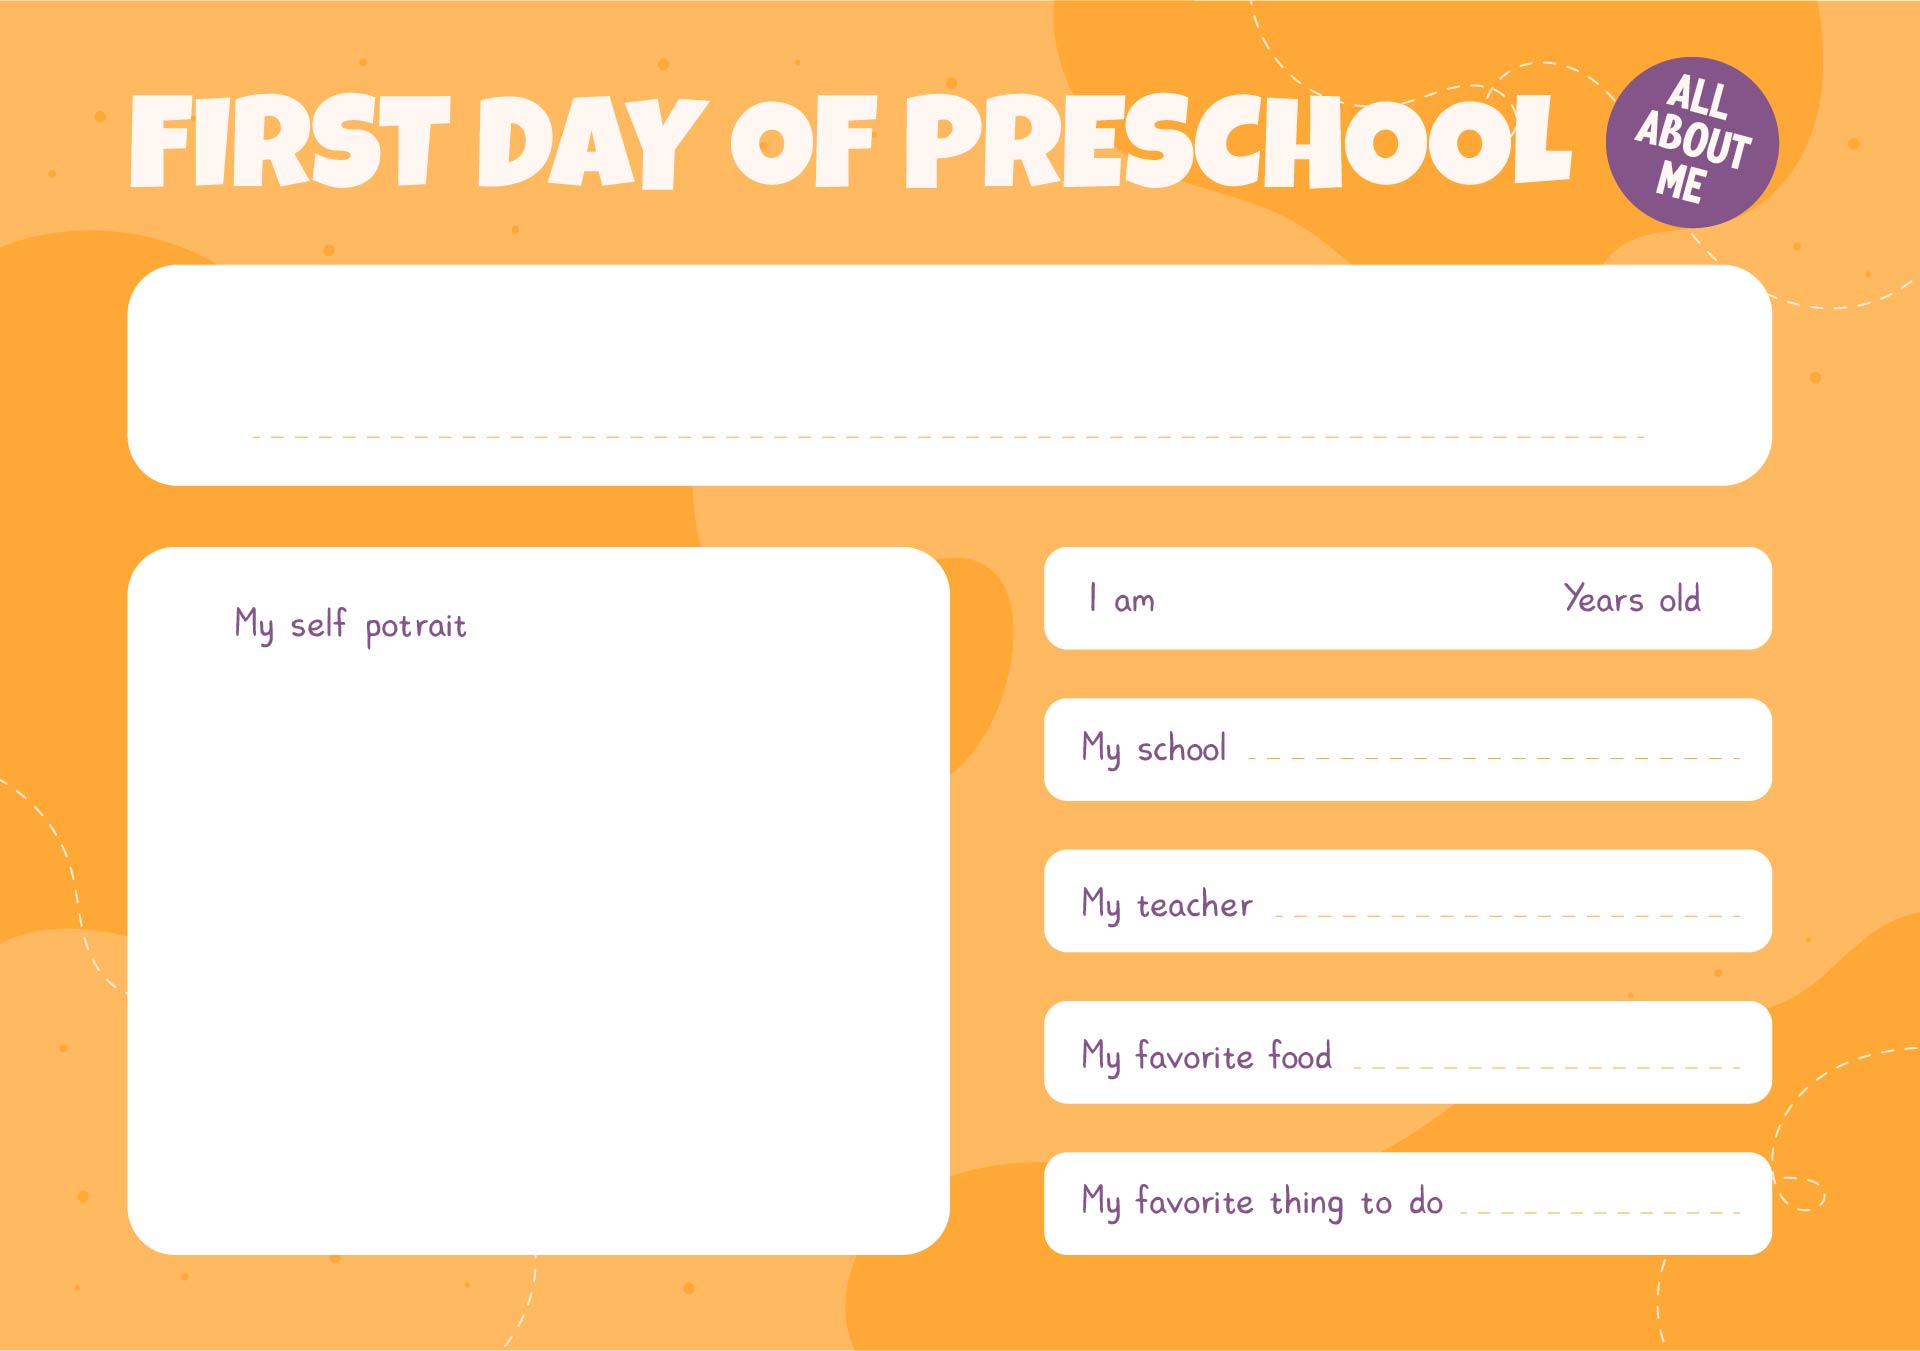 9-best-images-of-first-day-of-preschool-printable-first-day-of-preschool-sign-printable-first